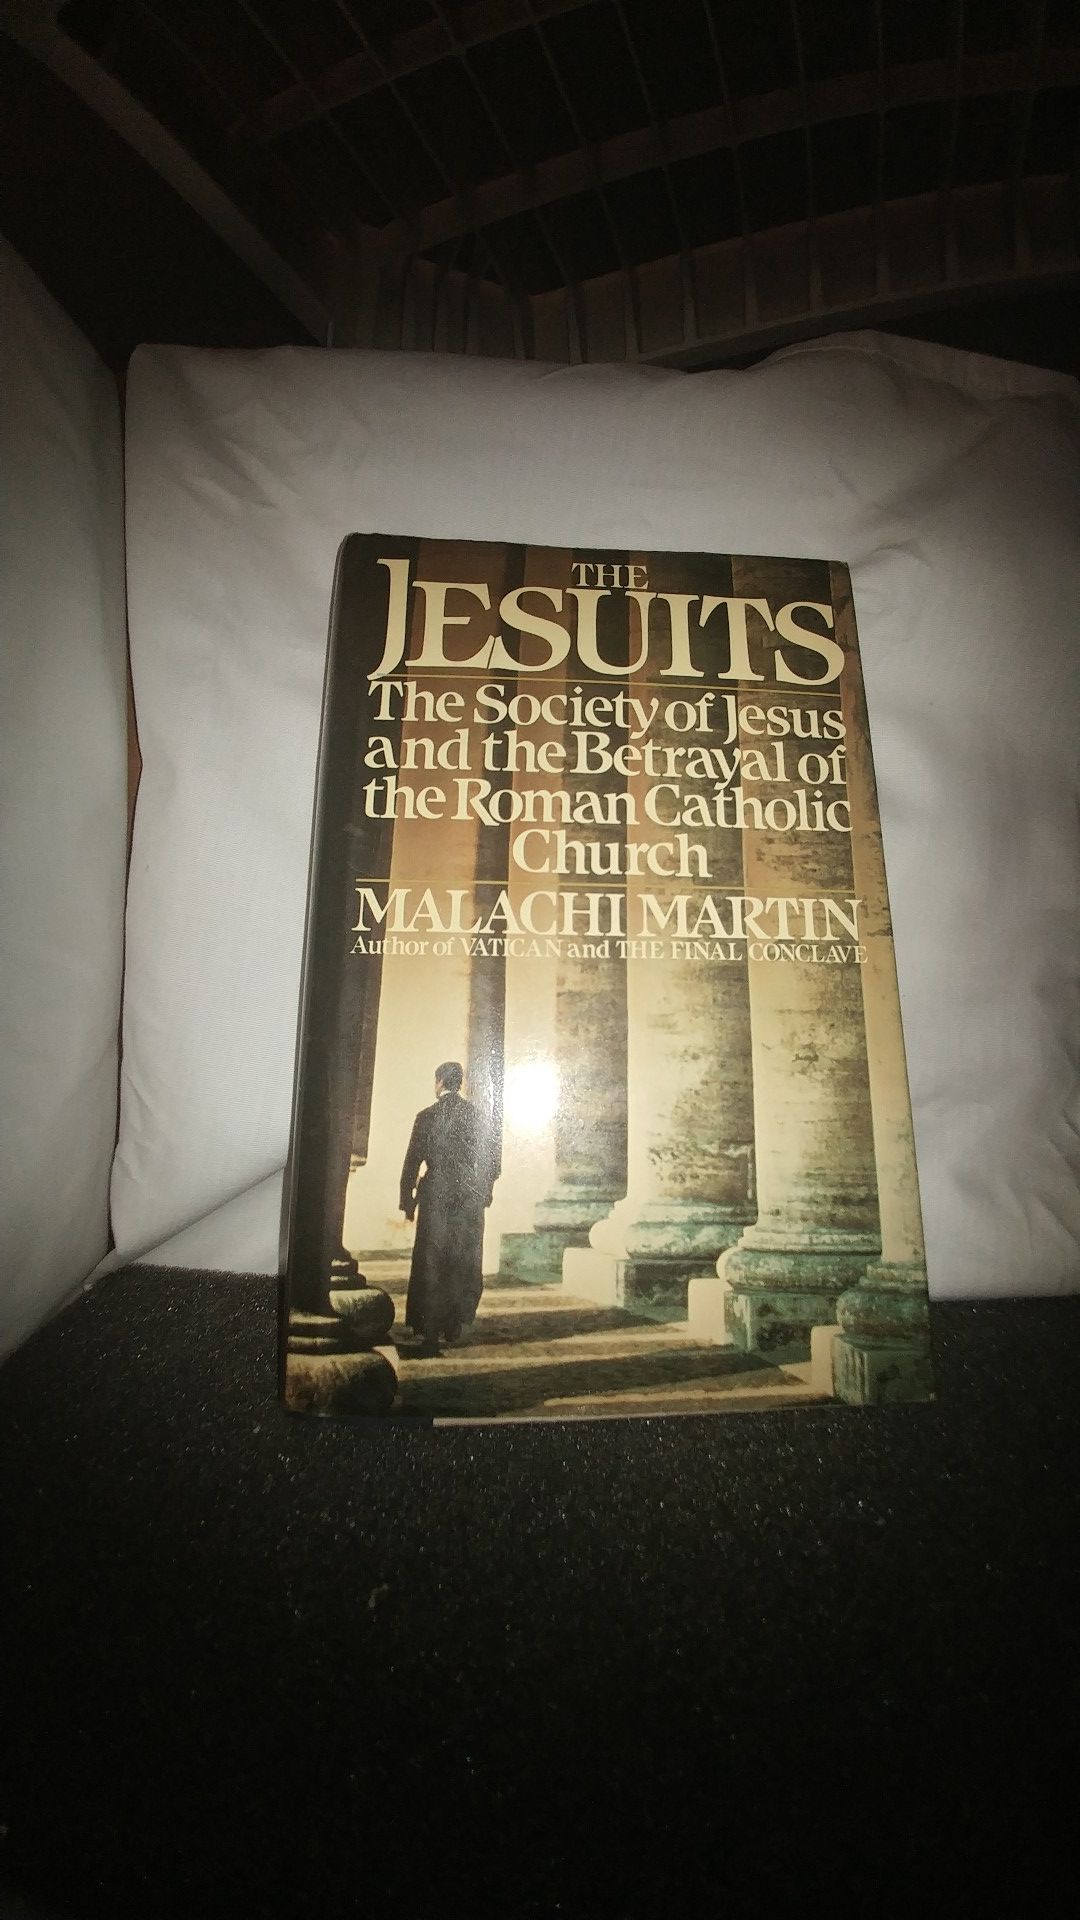 The Jesuits The Society of Jesus and the Betrayal of the Roman Catholic Church by Malachi Martin